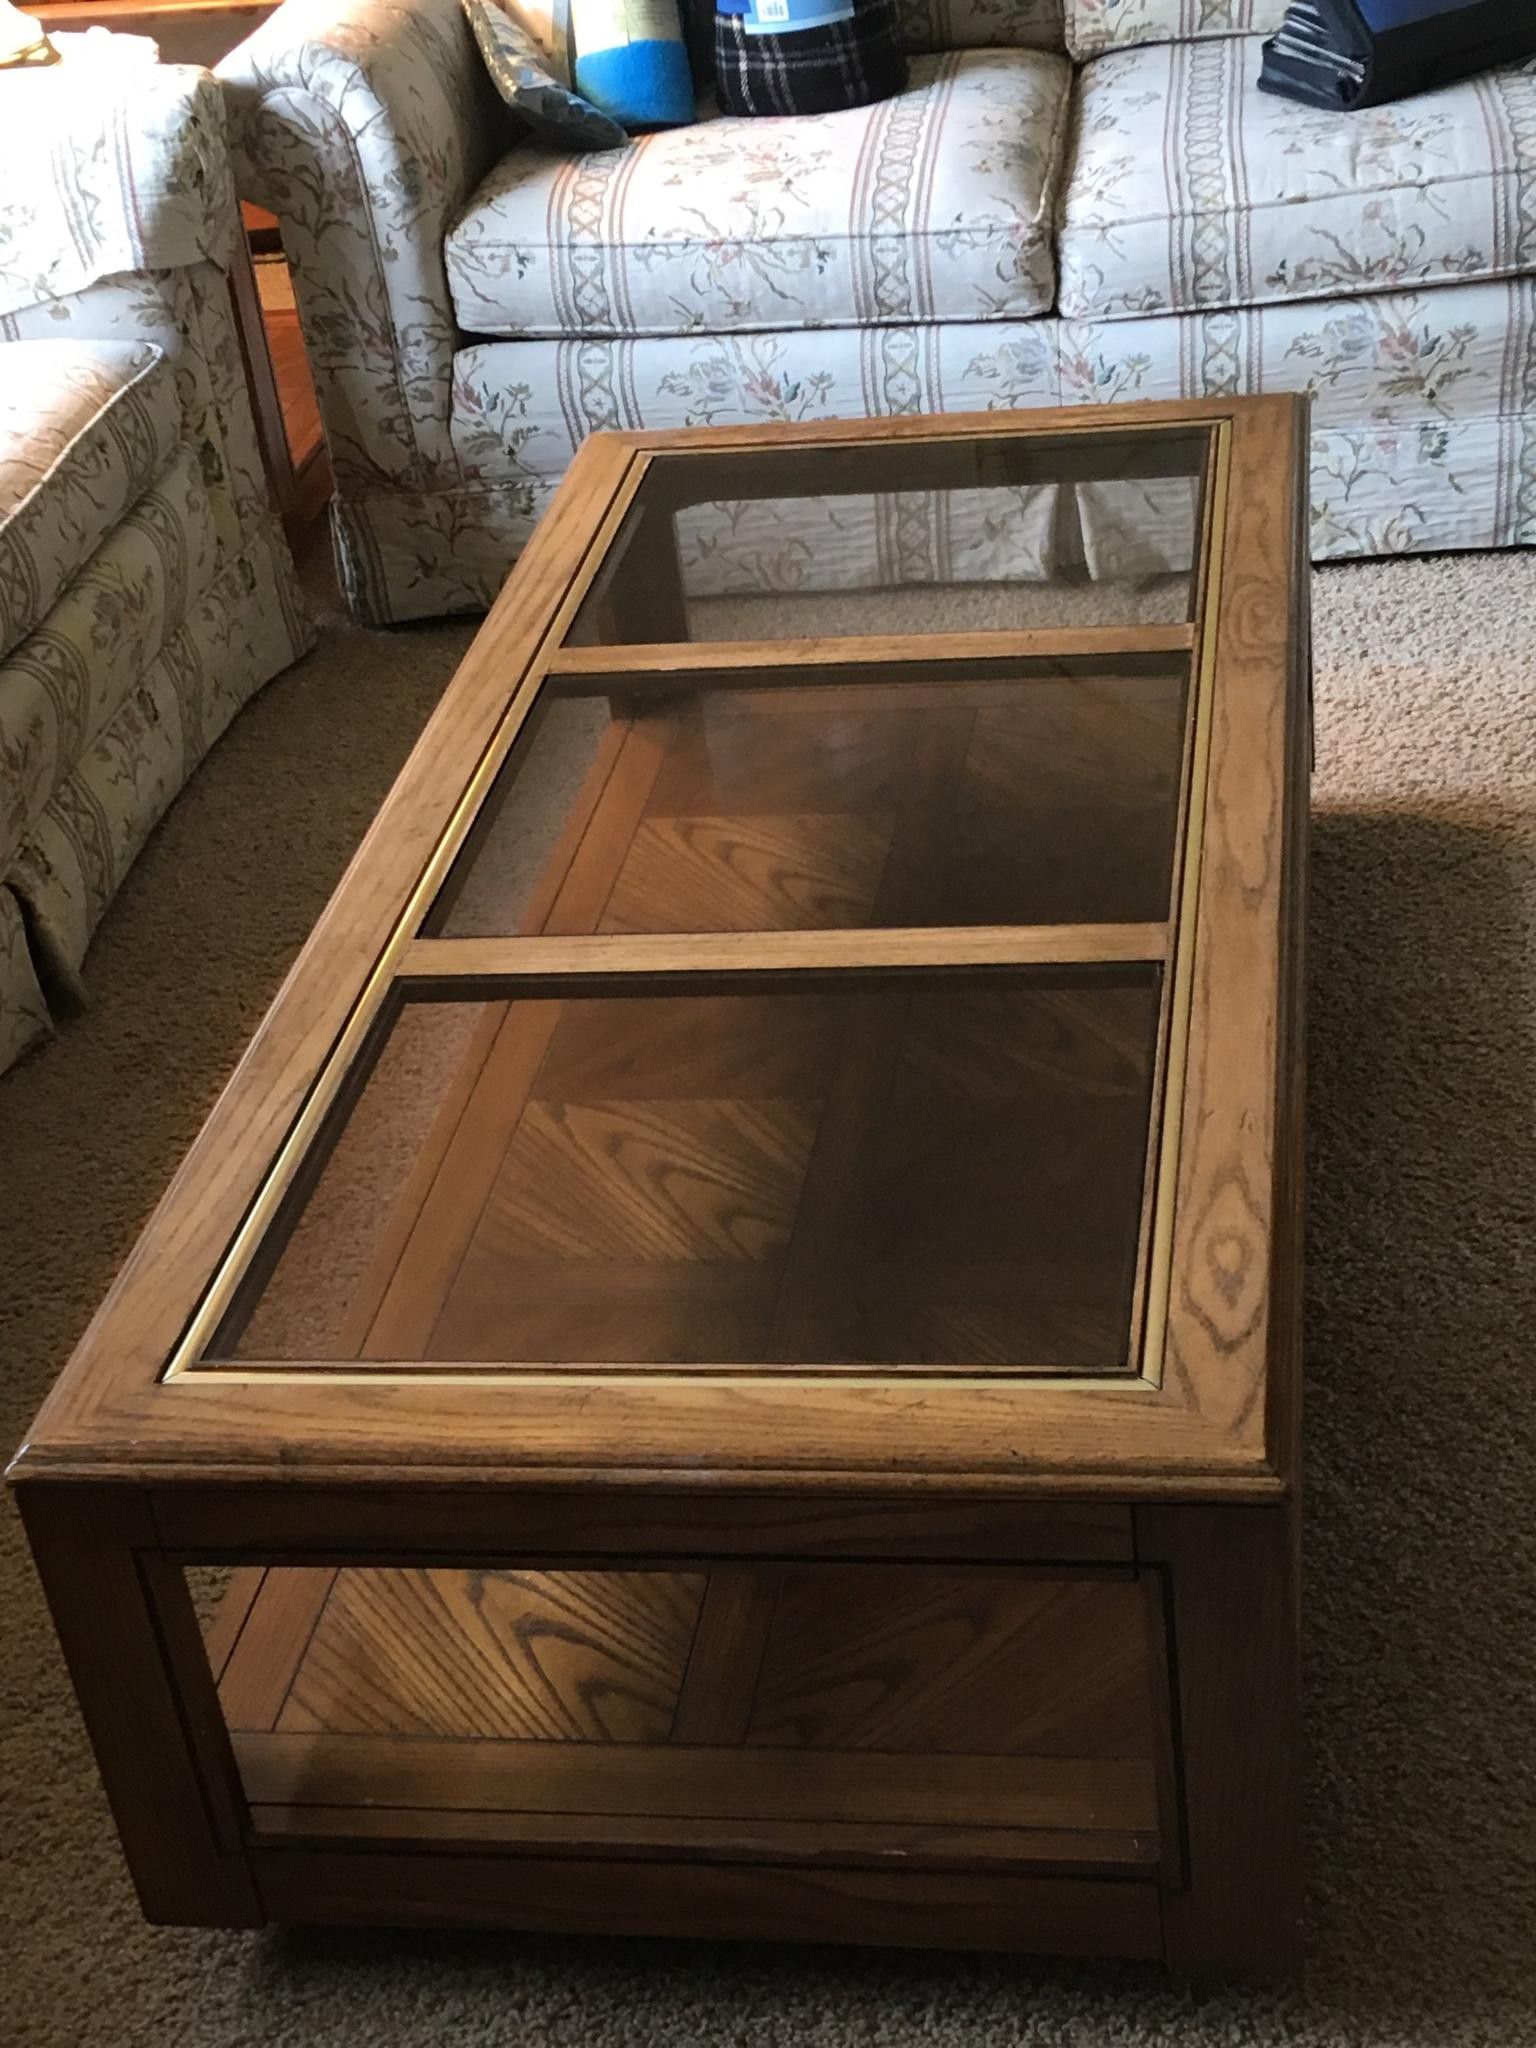 Coffee table with matching end tables